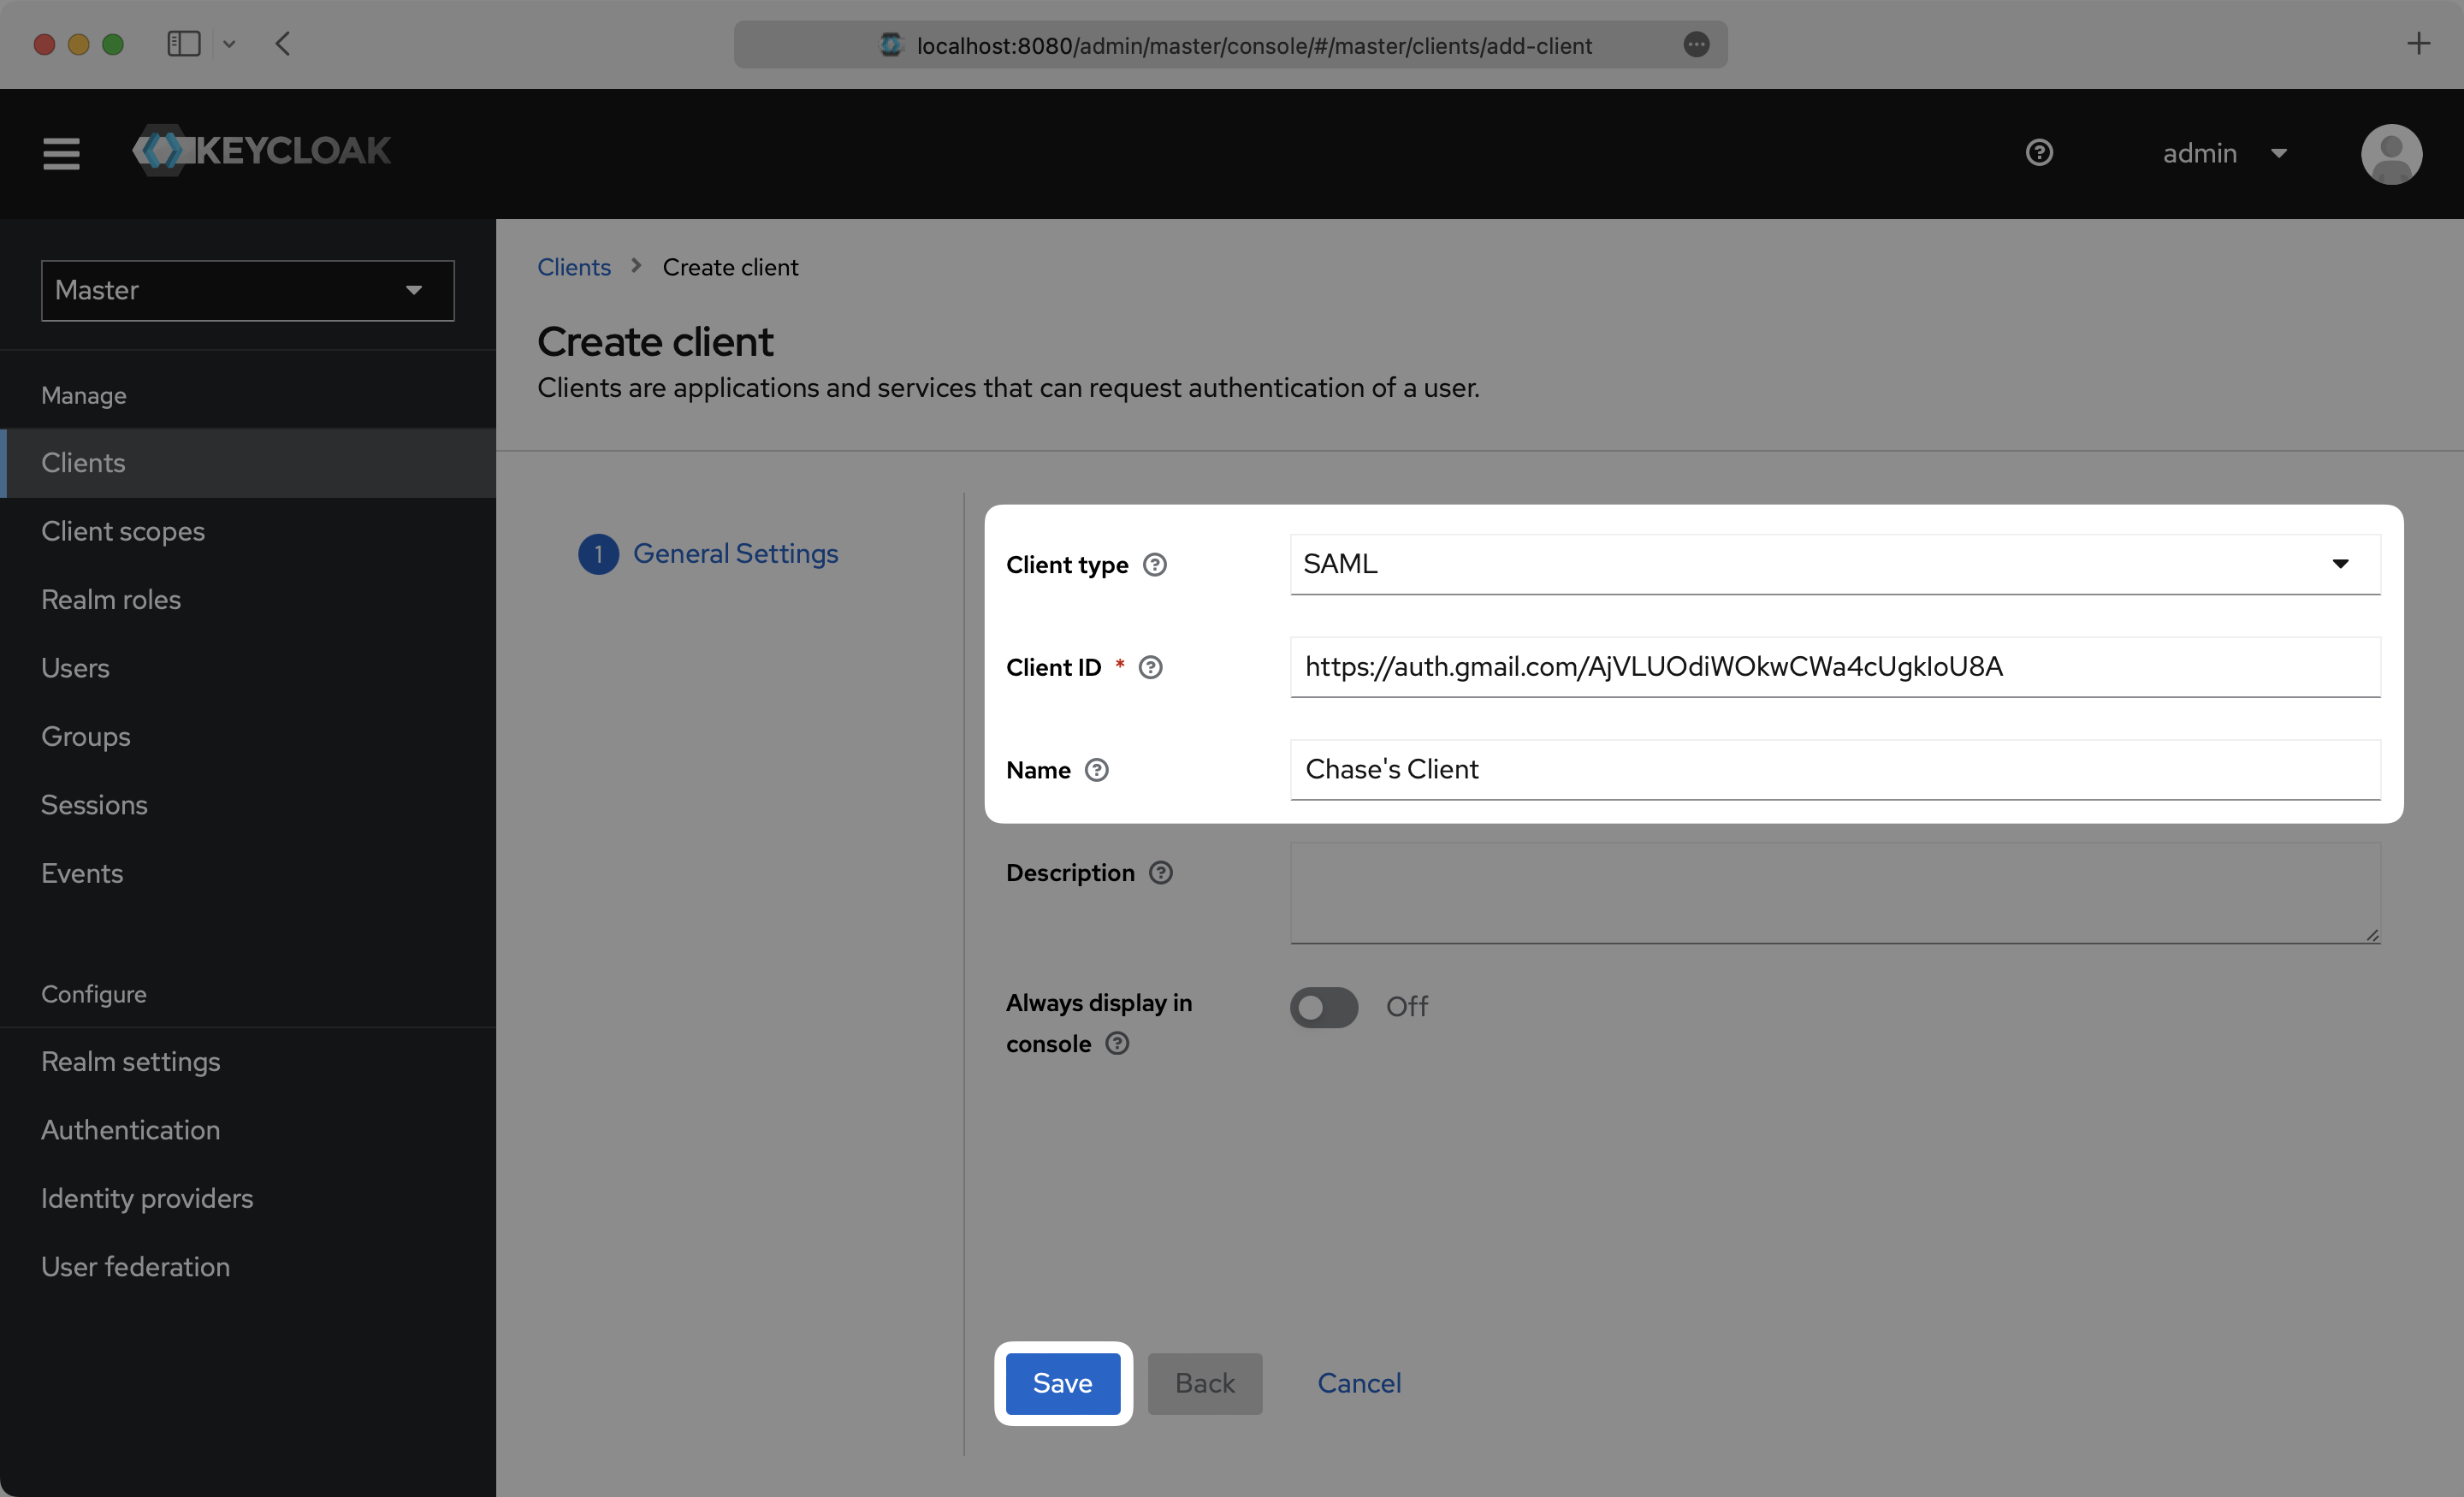 A screenshot highlighting the input fields "Client type", "Client ID" and "Name" in the Keycloak dashboard.